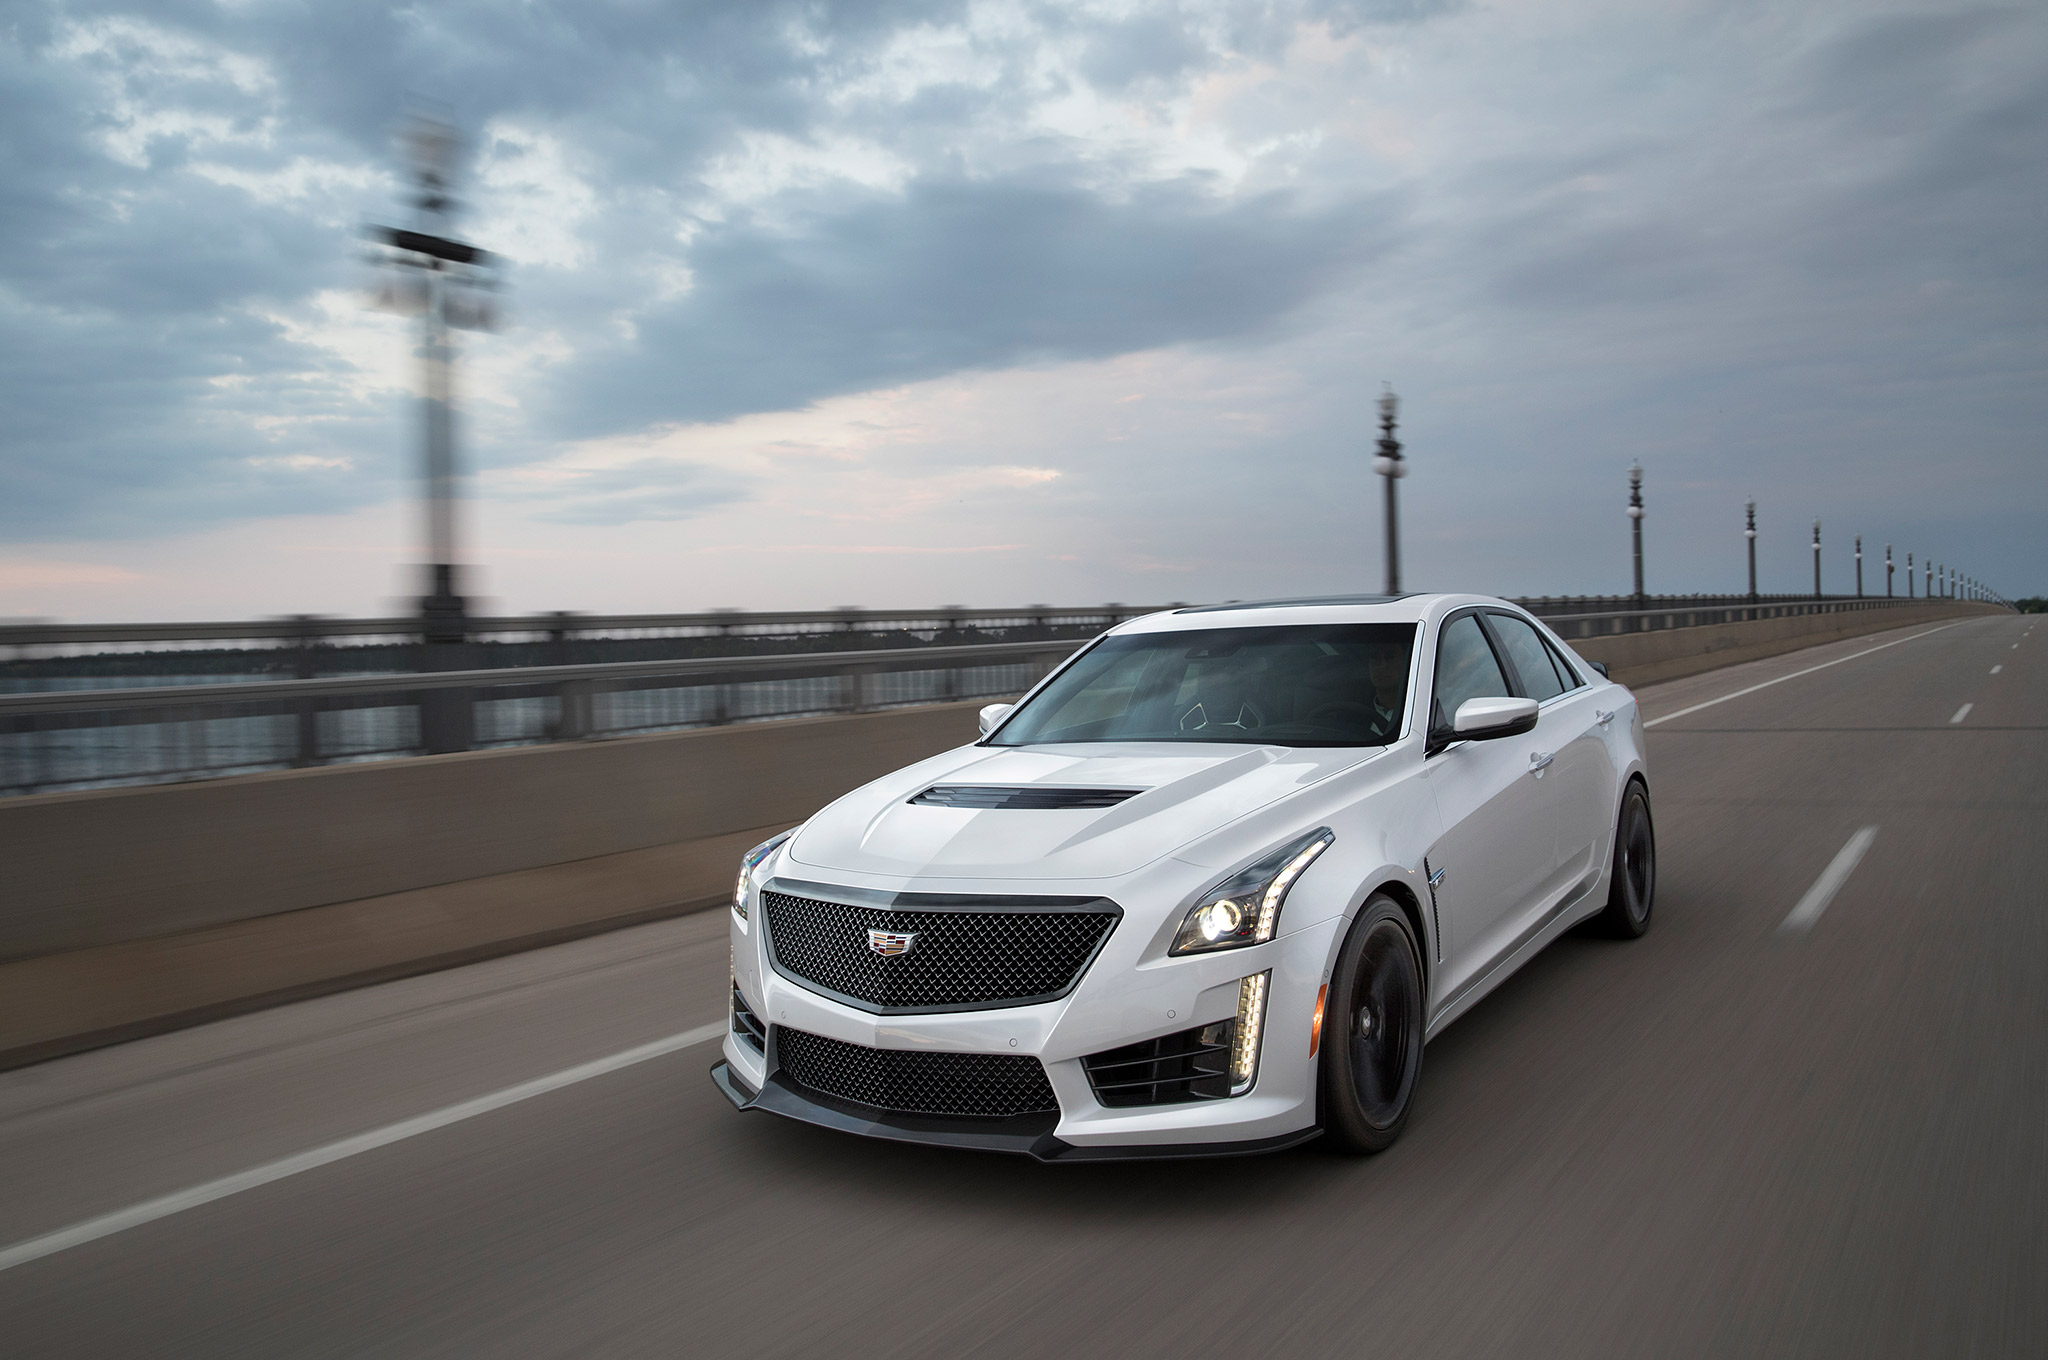 Cadillac CTS-V Backgrounds, Compatible - PC, Mobile, Gadgets| 2048x1360 px